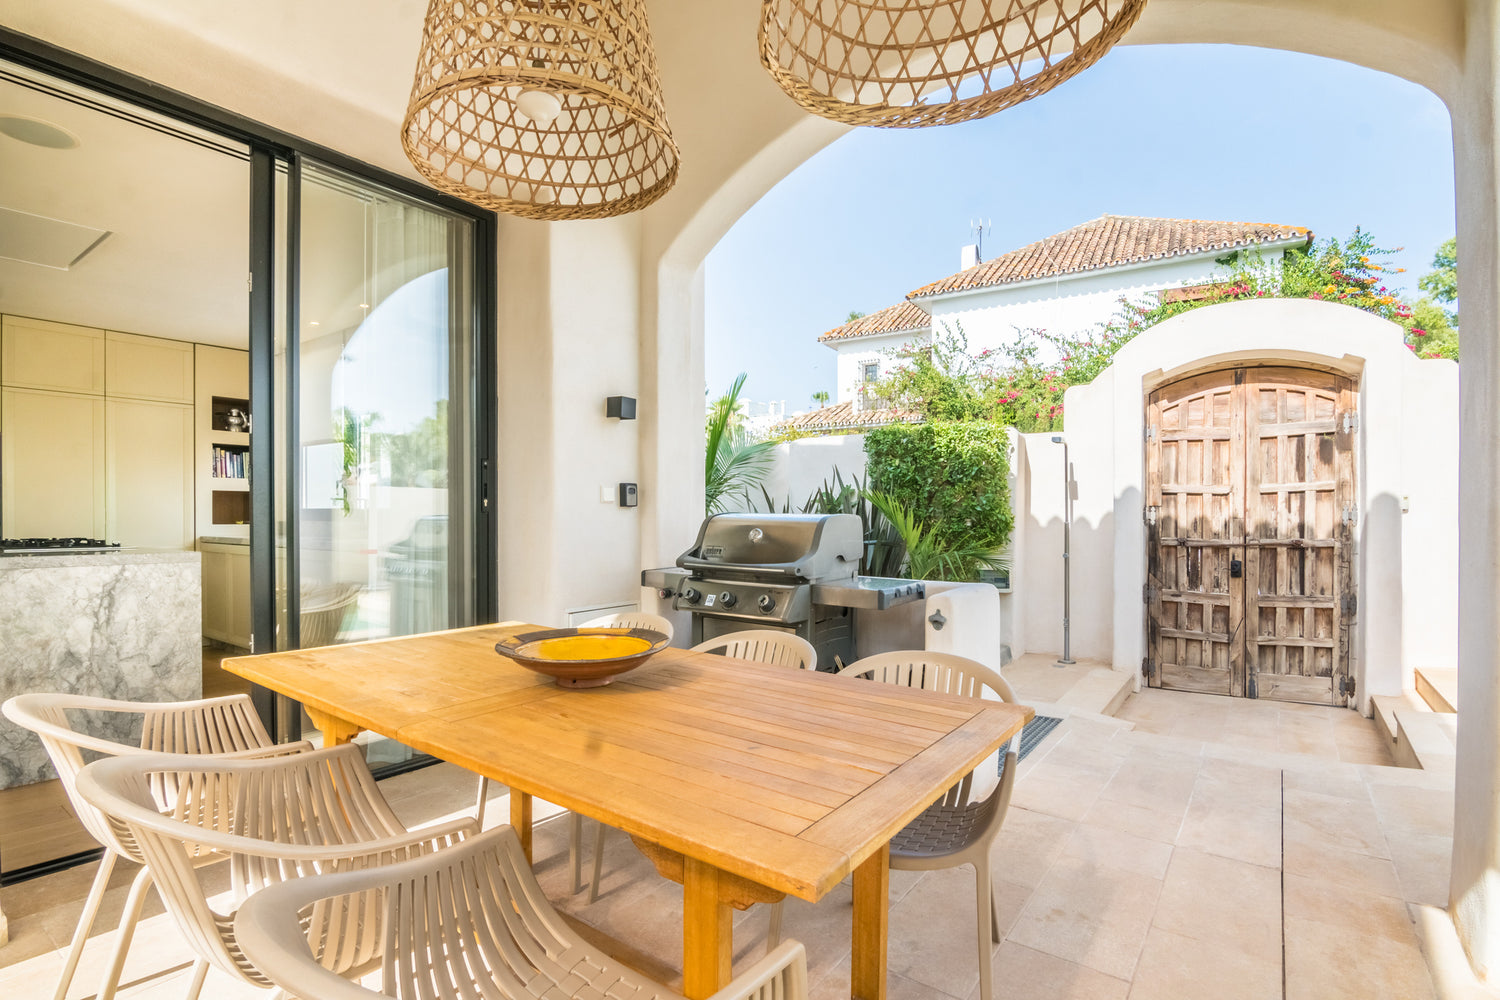 BBQ dinning table exterior area of Villa, Marbella luxury Beach House short term rental, located on the beach side at Marbella´s exclusive Golden Mile just by beach